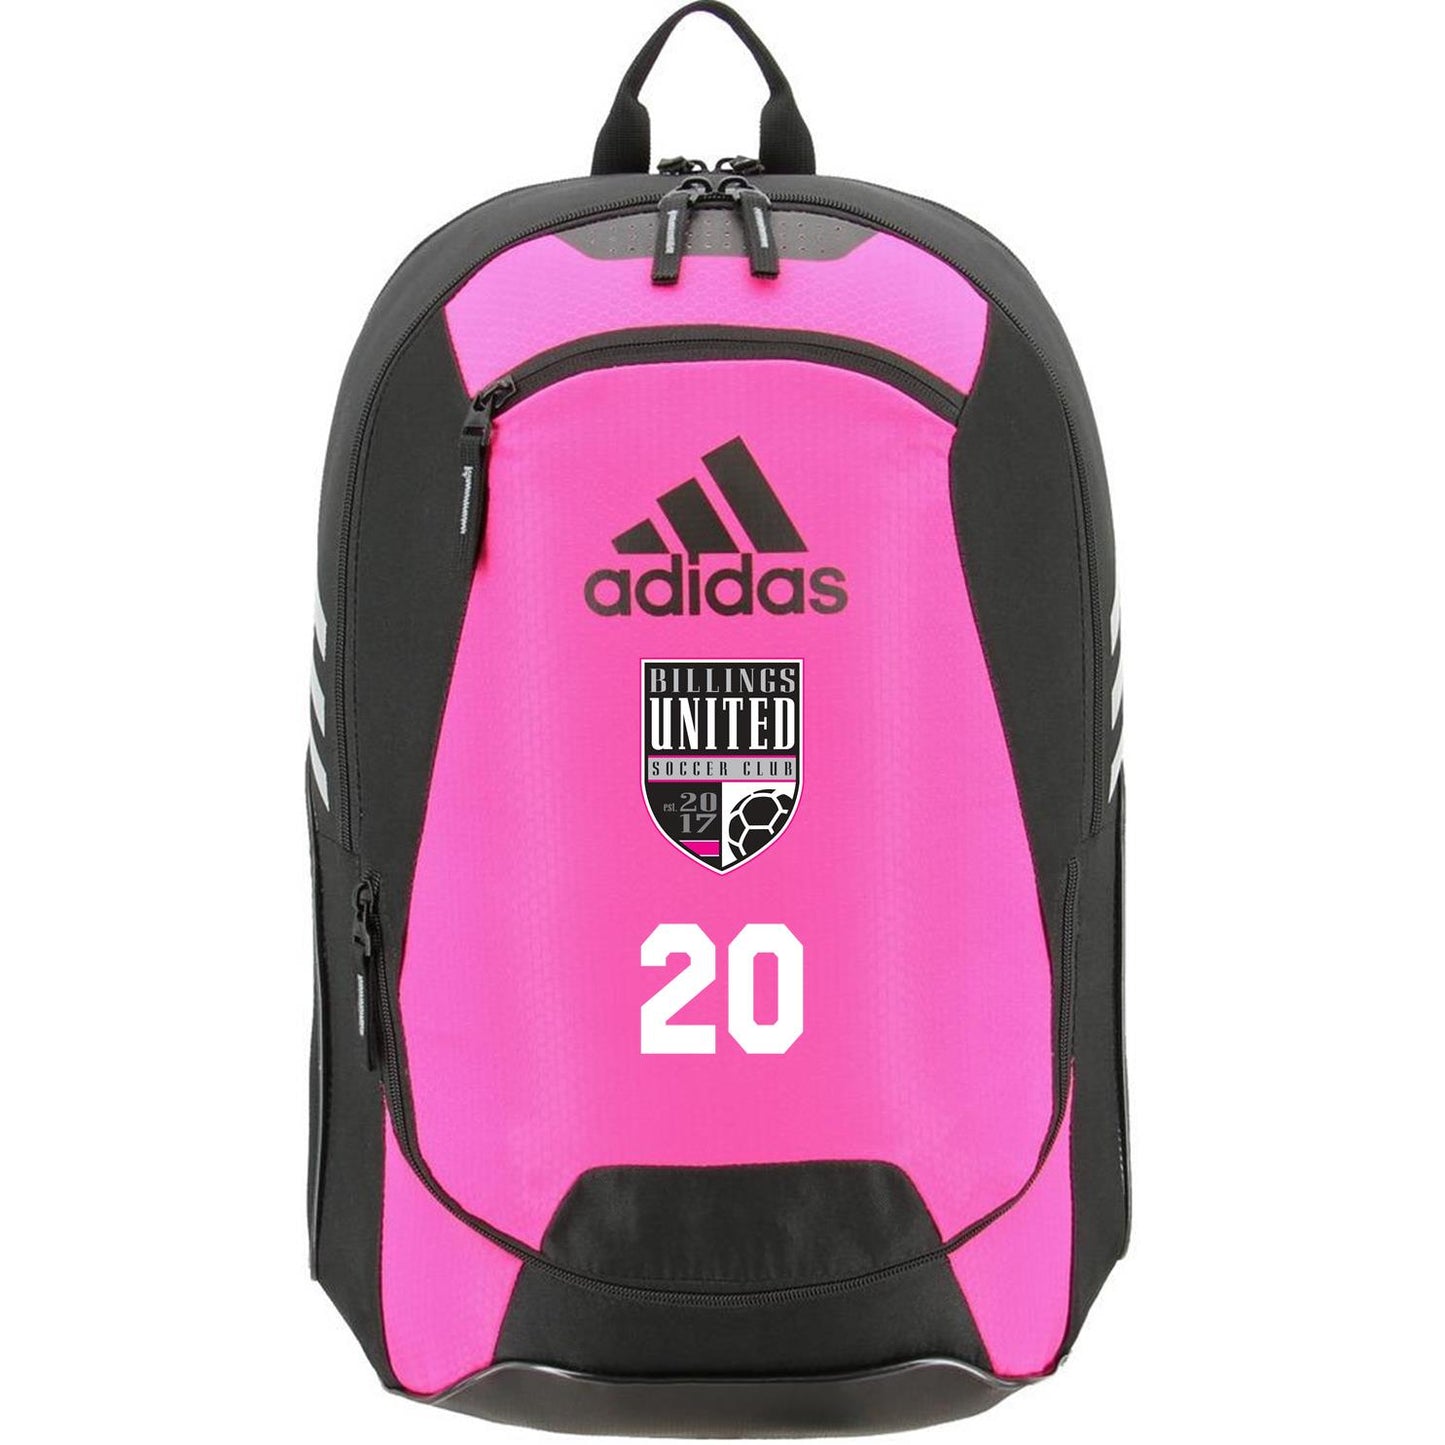 Billings United Timbers Backpack [Limited Pink]